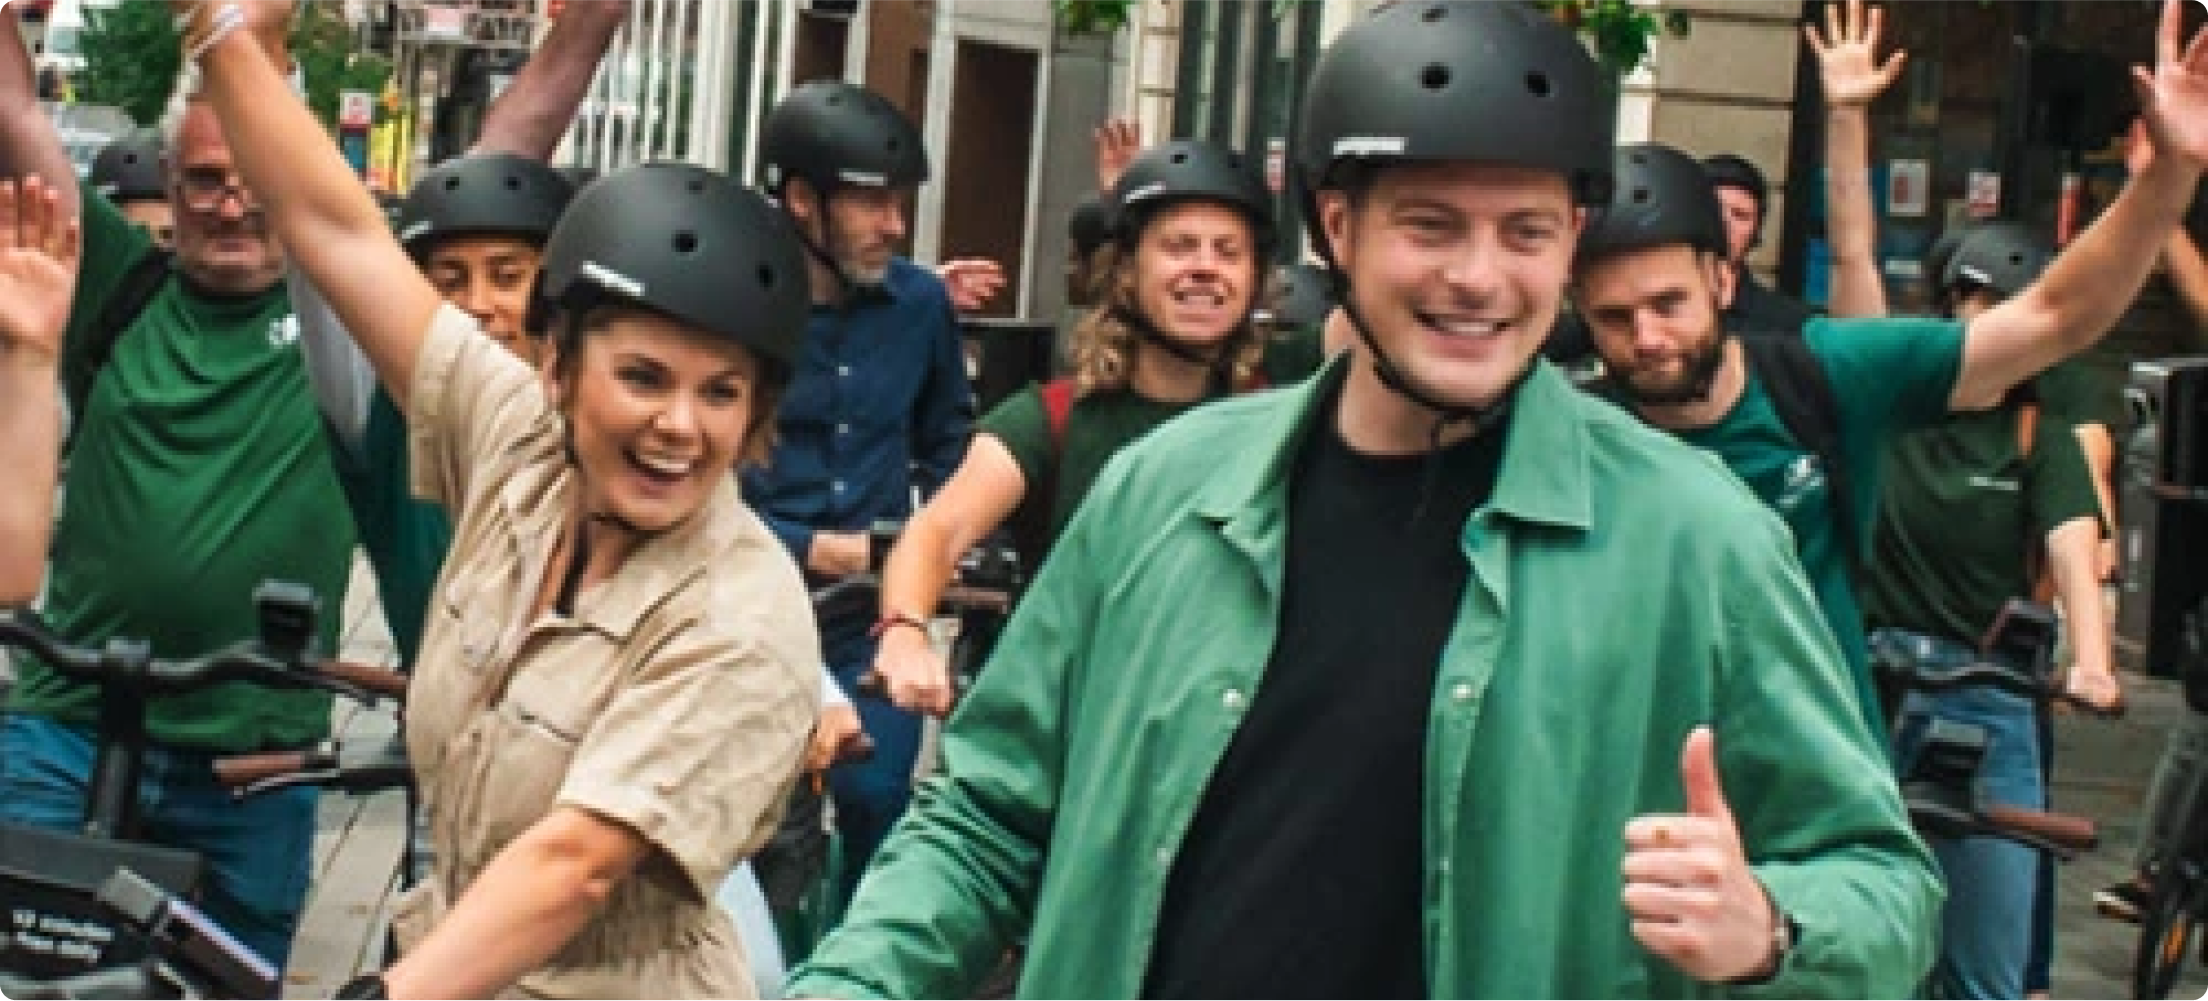 Human Forest card image with causcasian people smiling together and raising their arms while riding ebikes in an urban area.